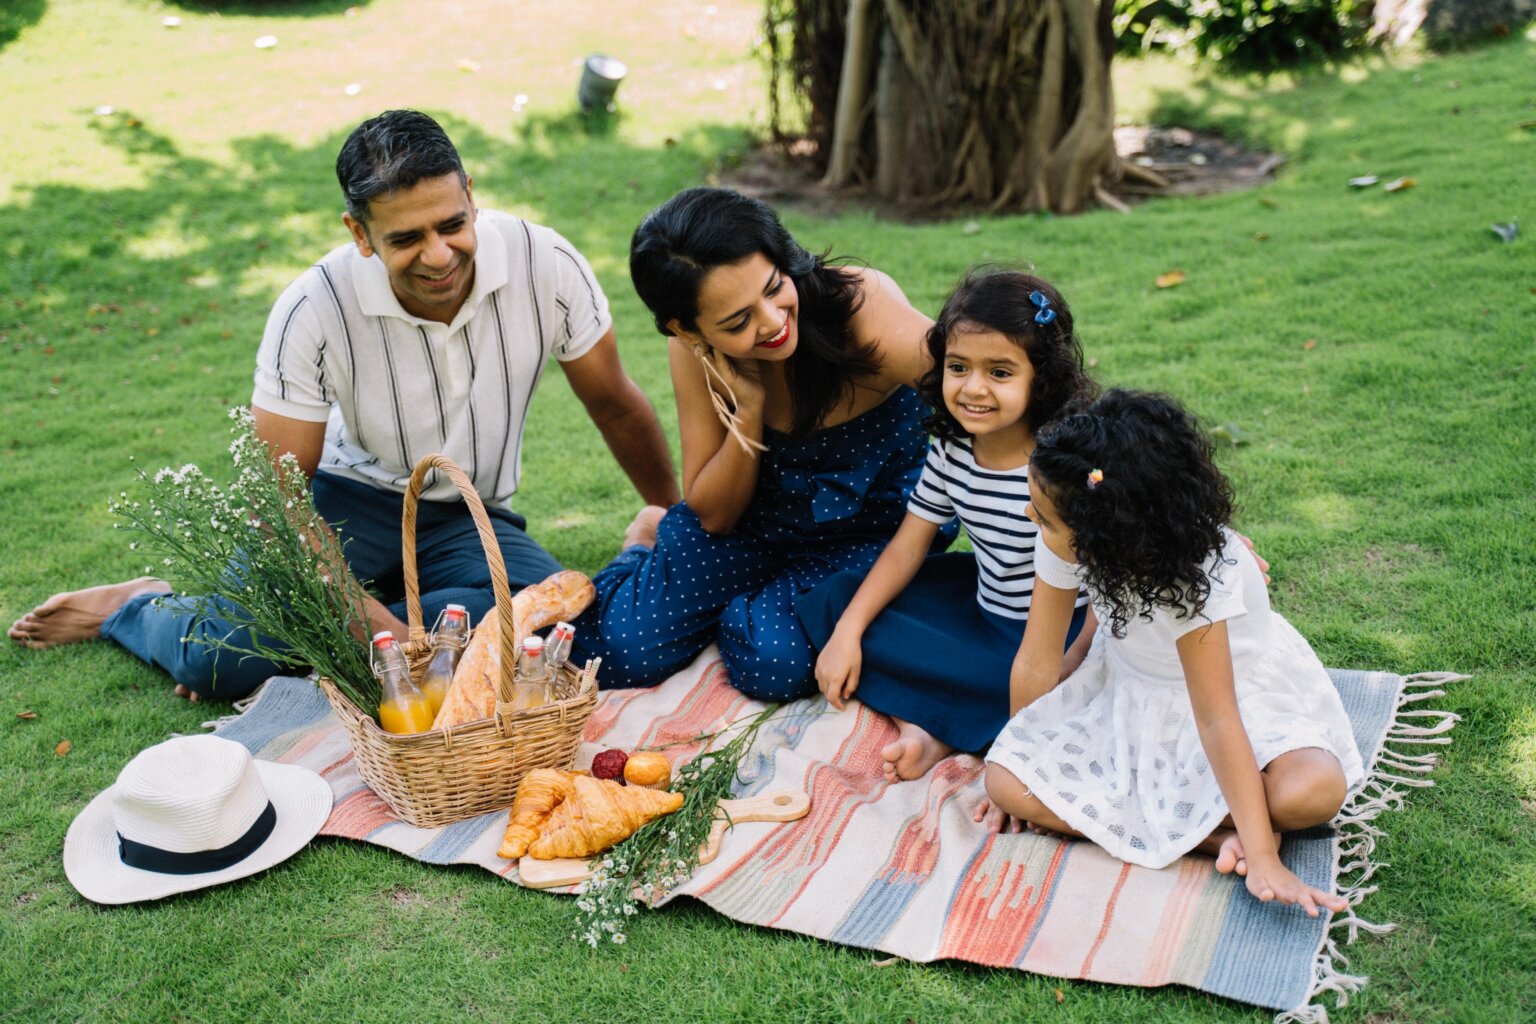 A dad, mom, and their two daughters having a picnic on the grass.